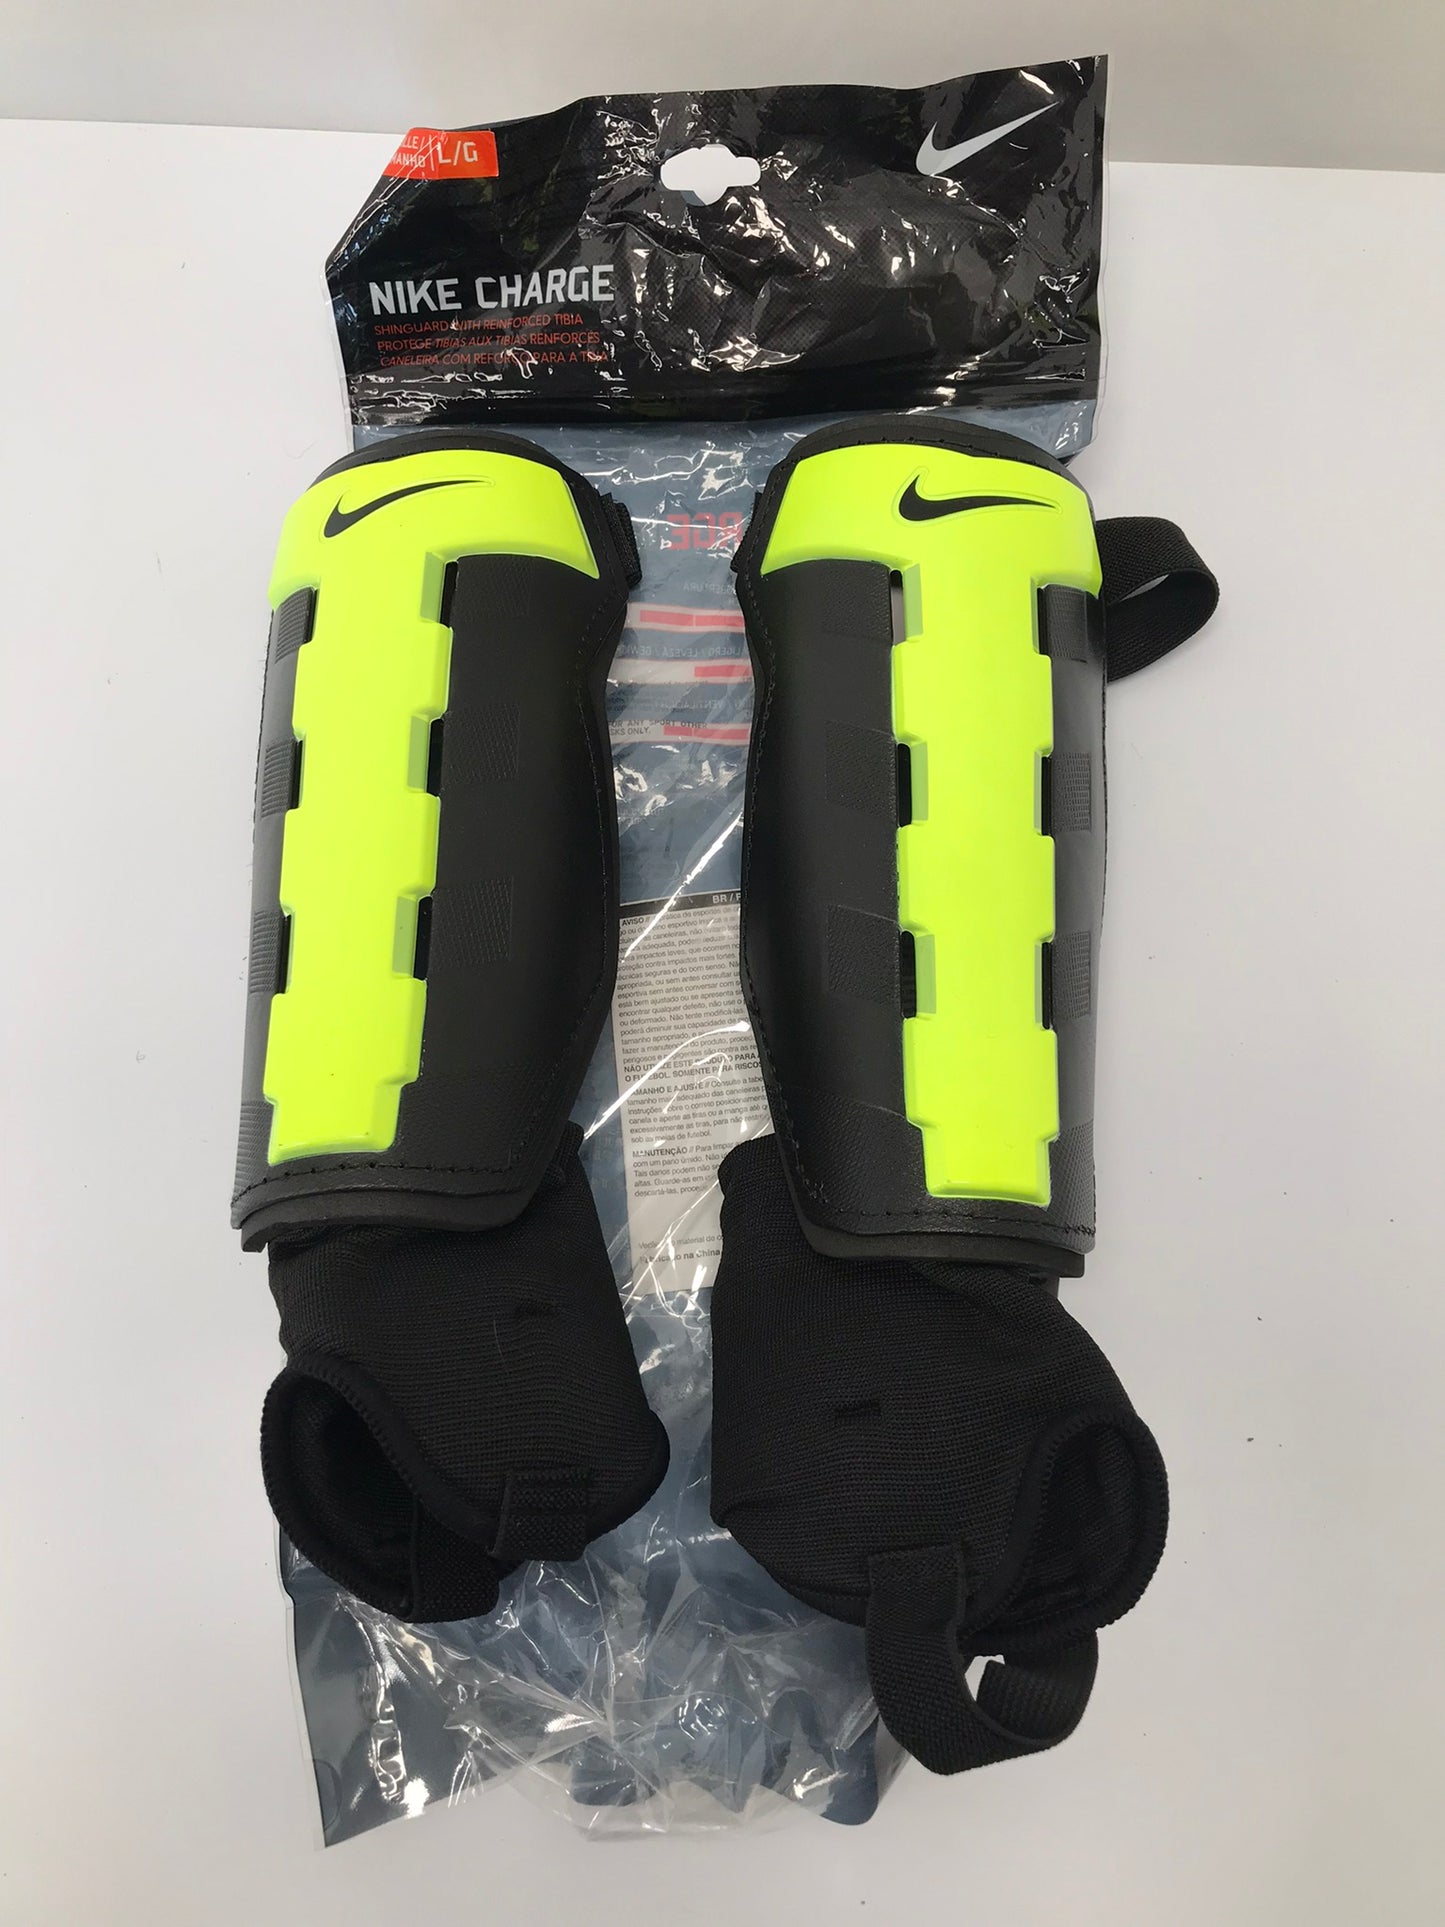 Soccer Shin Pads Adult Size Large Nike Charge Lime Black New In Package